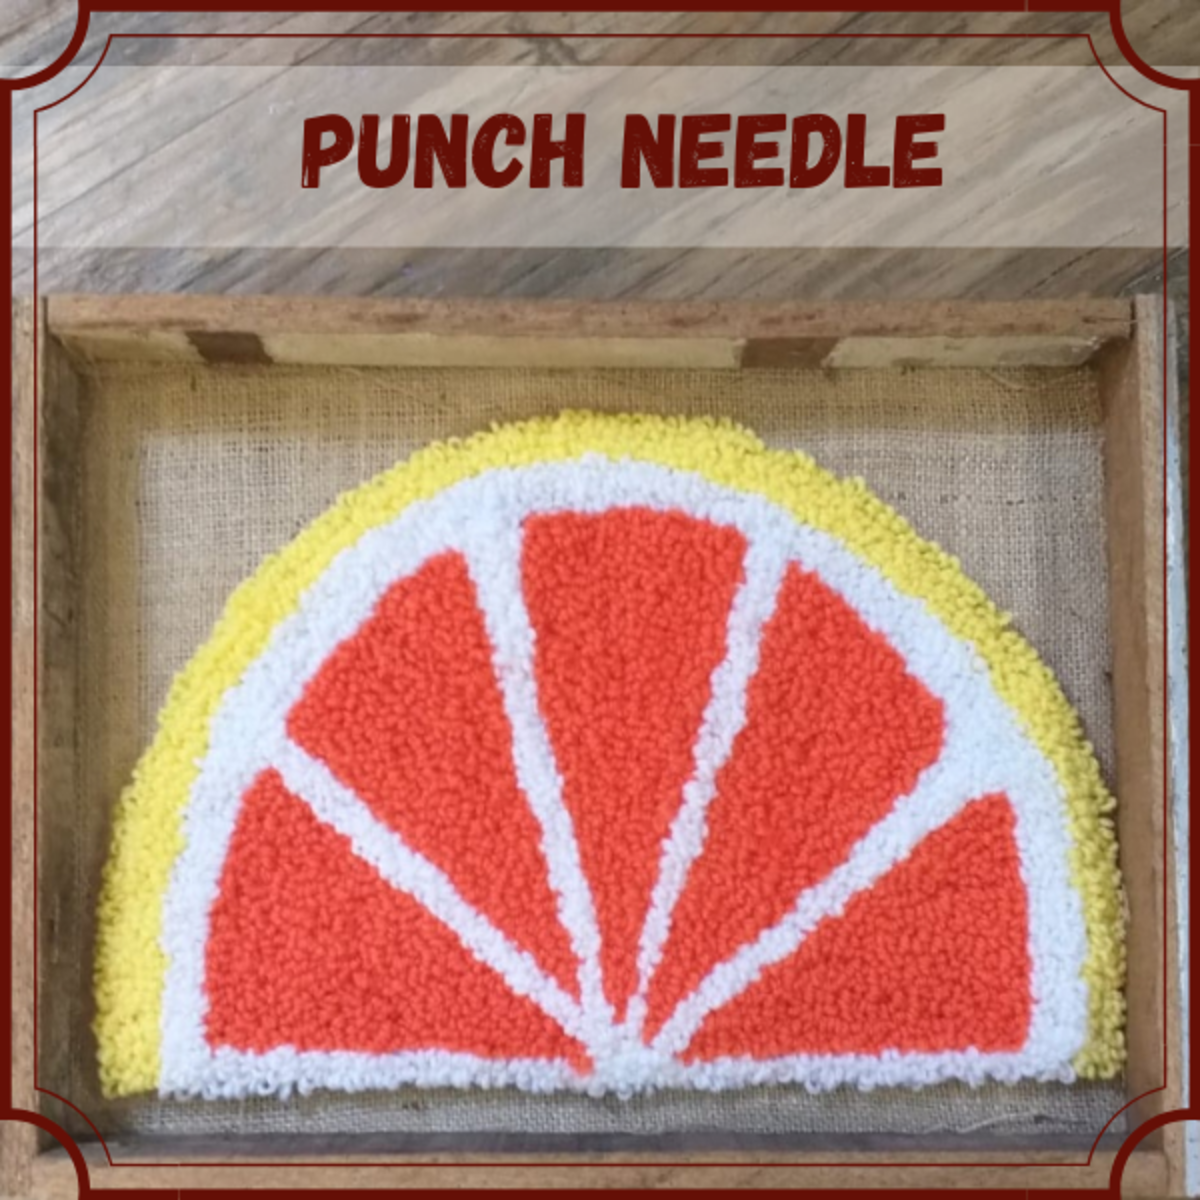 Follow this tutorial to start learning punch needlecraft!